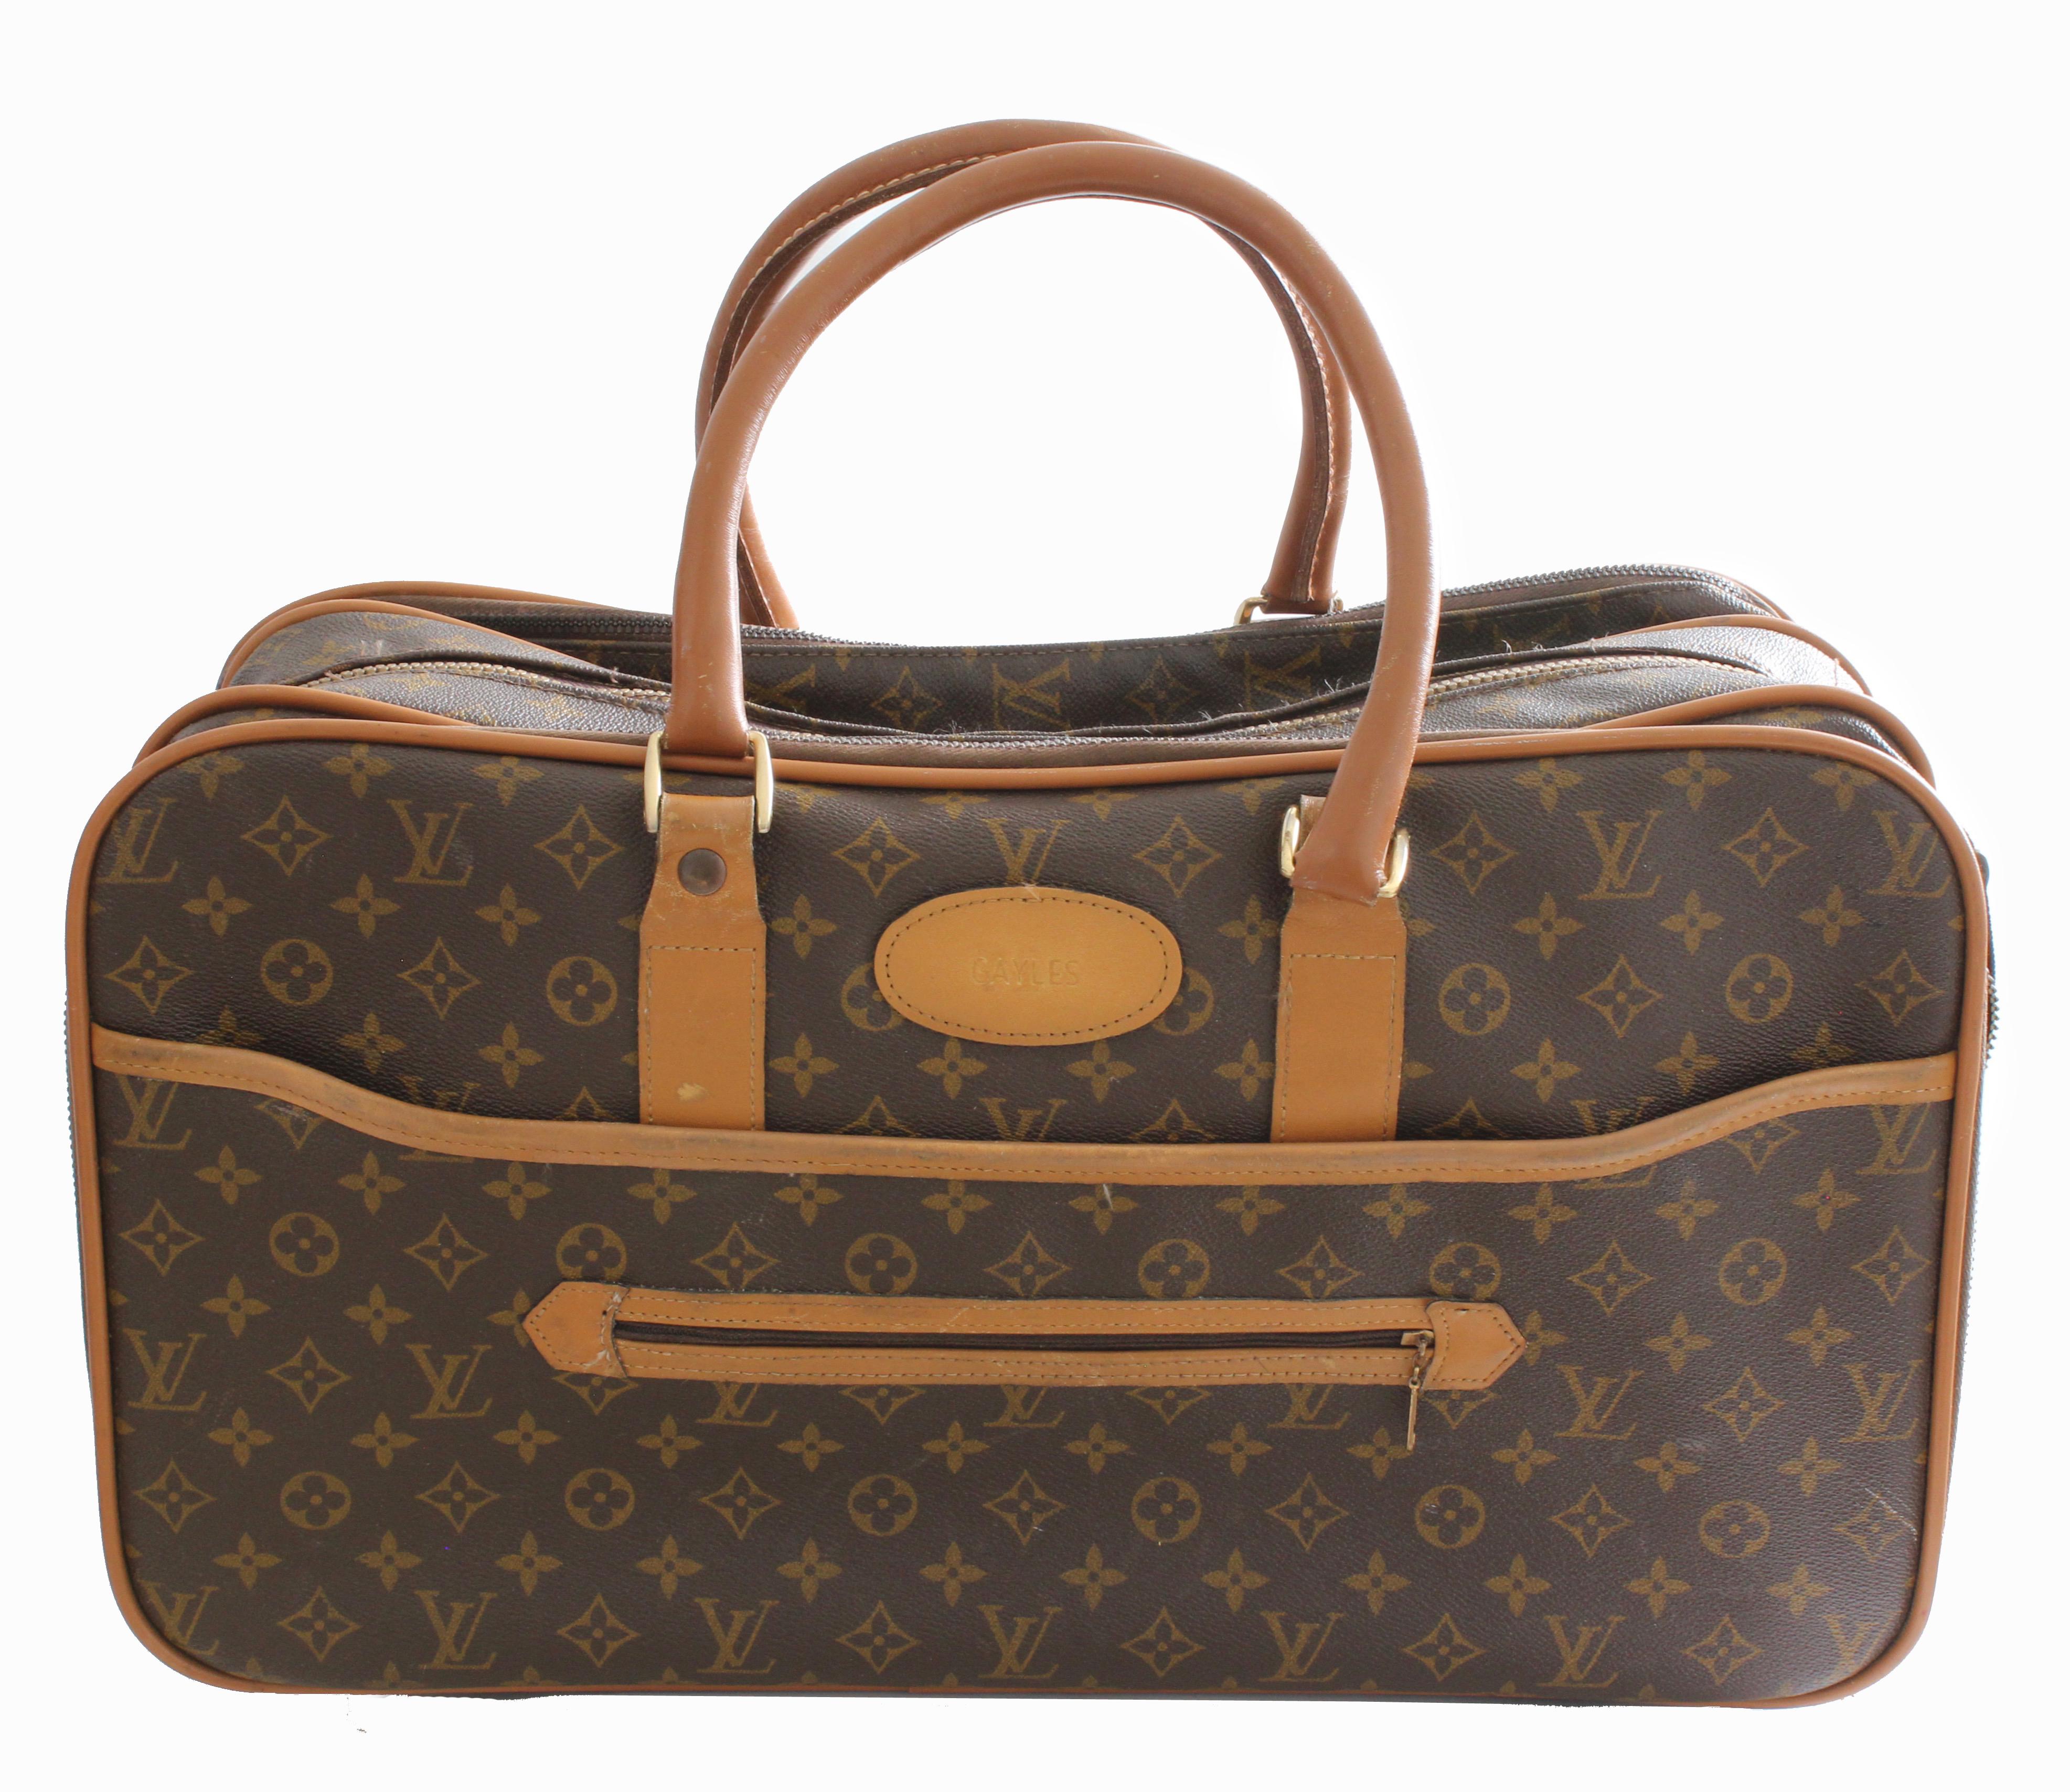 Here's a hard-to-find soft side suitcase or carry all was made in the 1970s by The French Company for Louis Vuitton and Saks Fifth Avenue. Produced for only a short period, these incredible French Company pieces are so hard to find nowadays and are